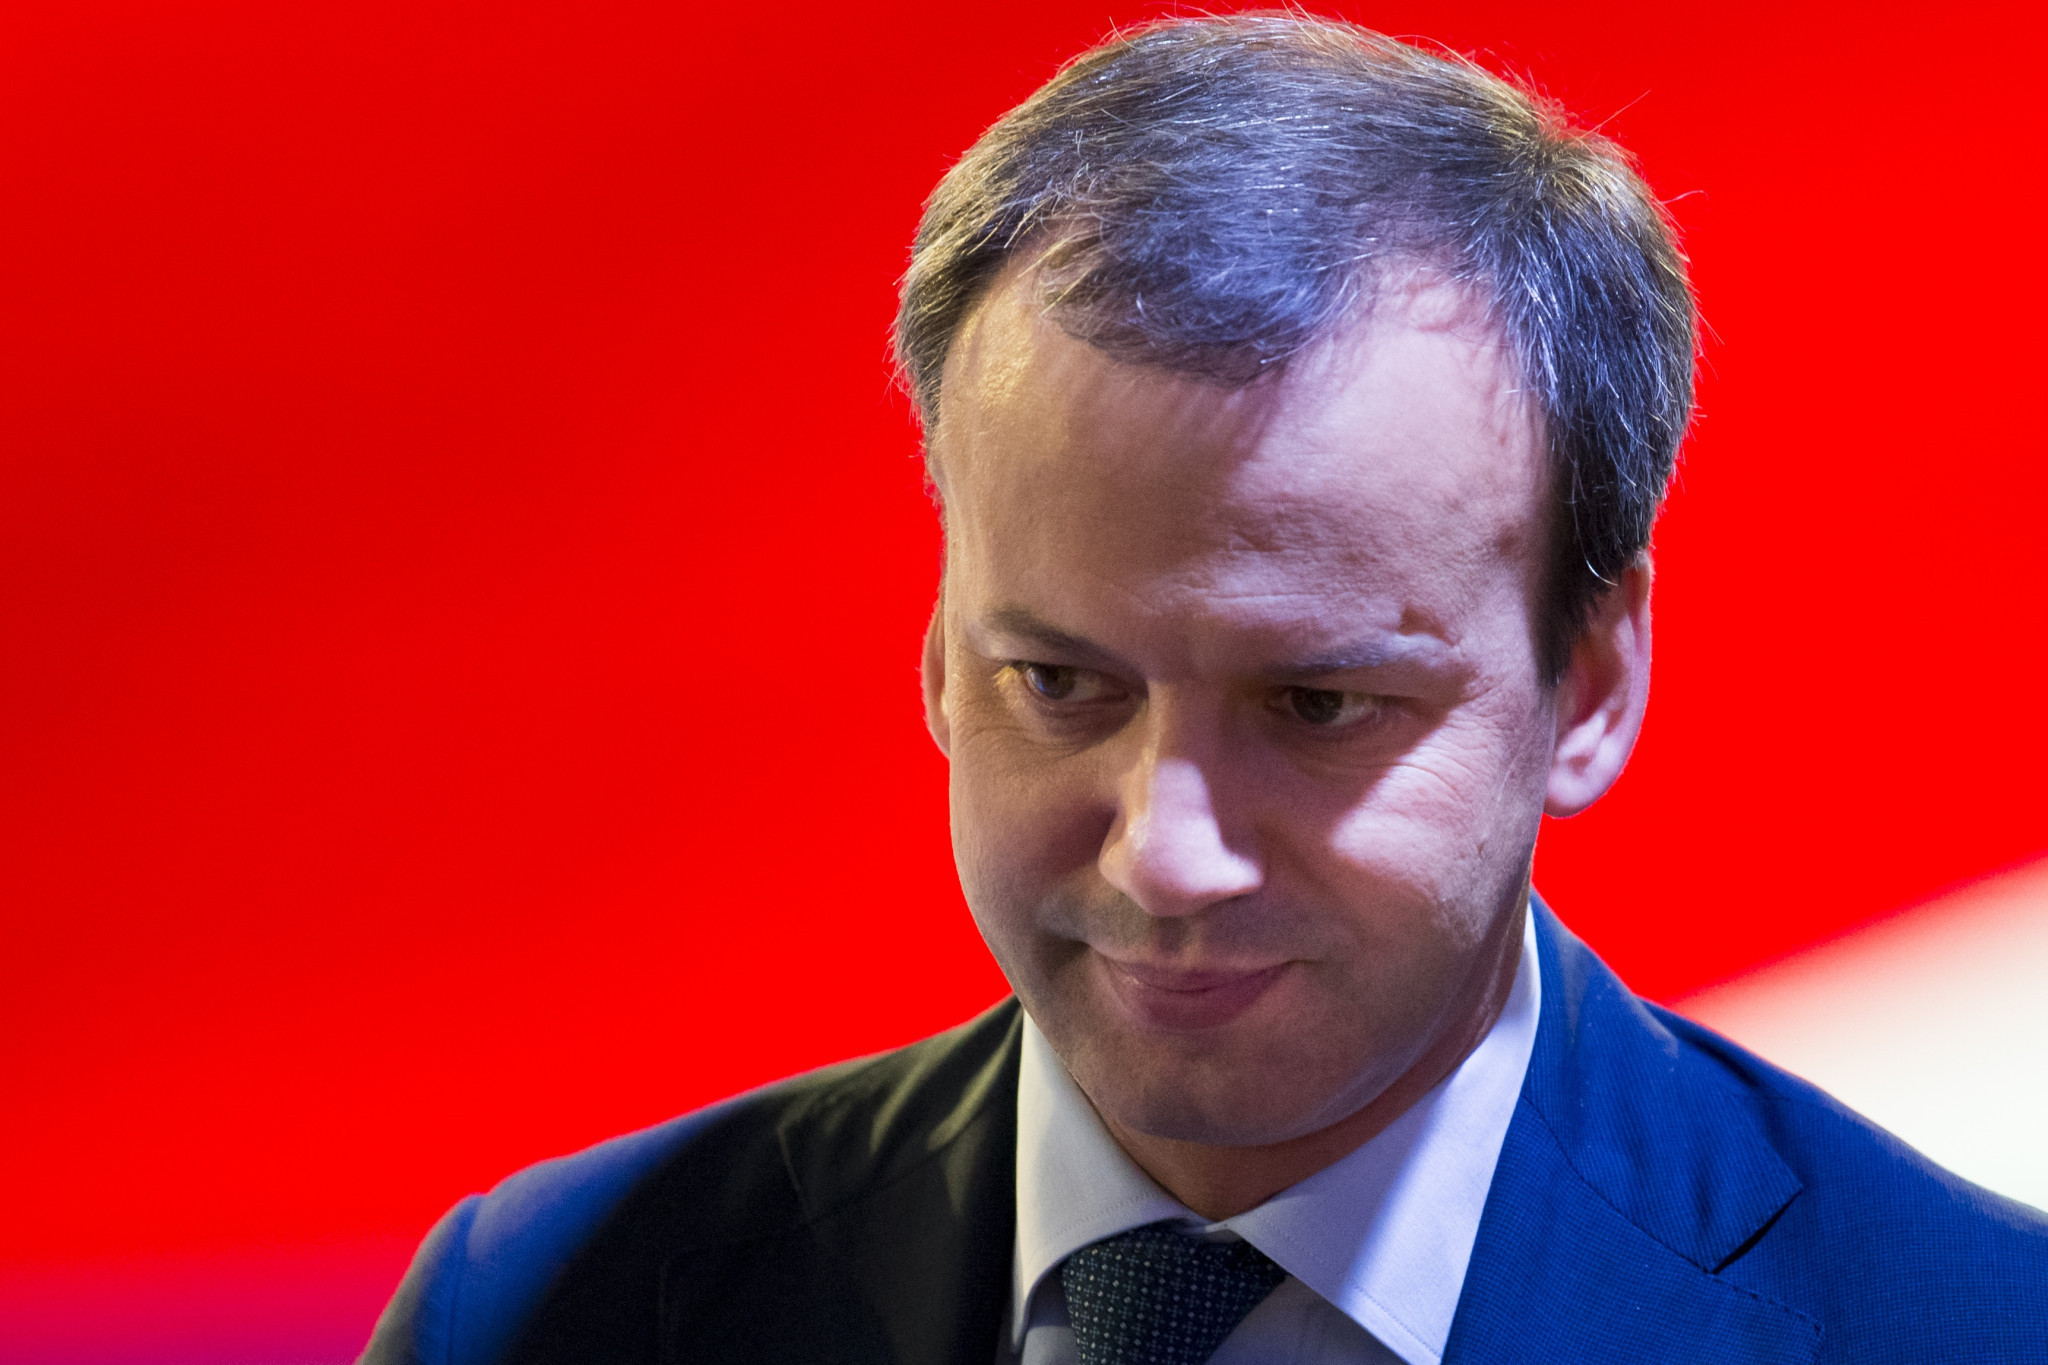 Arkady Dvorkovich will be tasked with coordinating the tournament at a Government level ©Getty Images